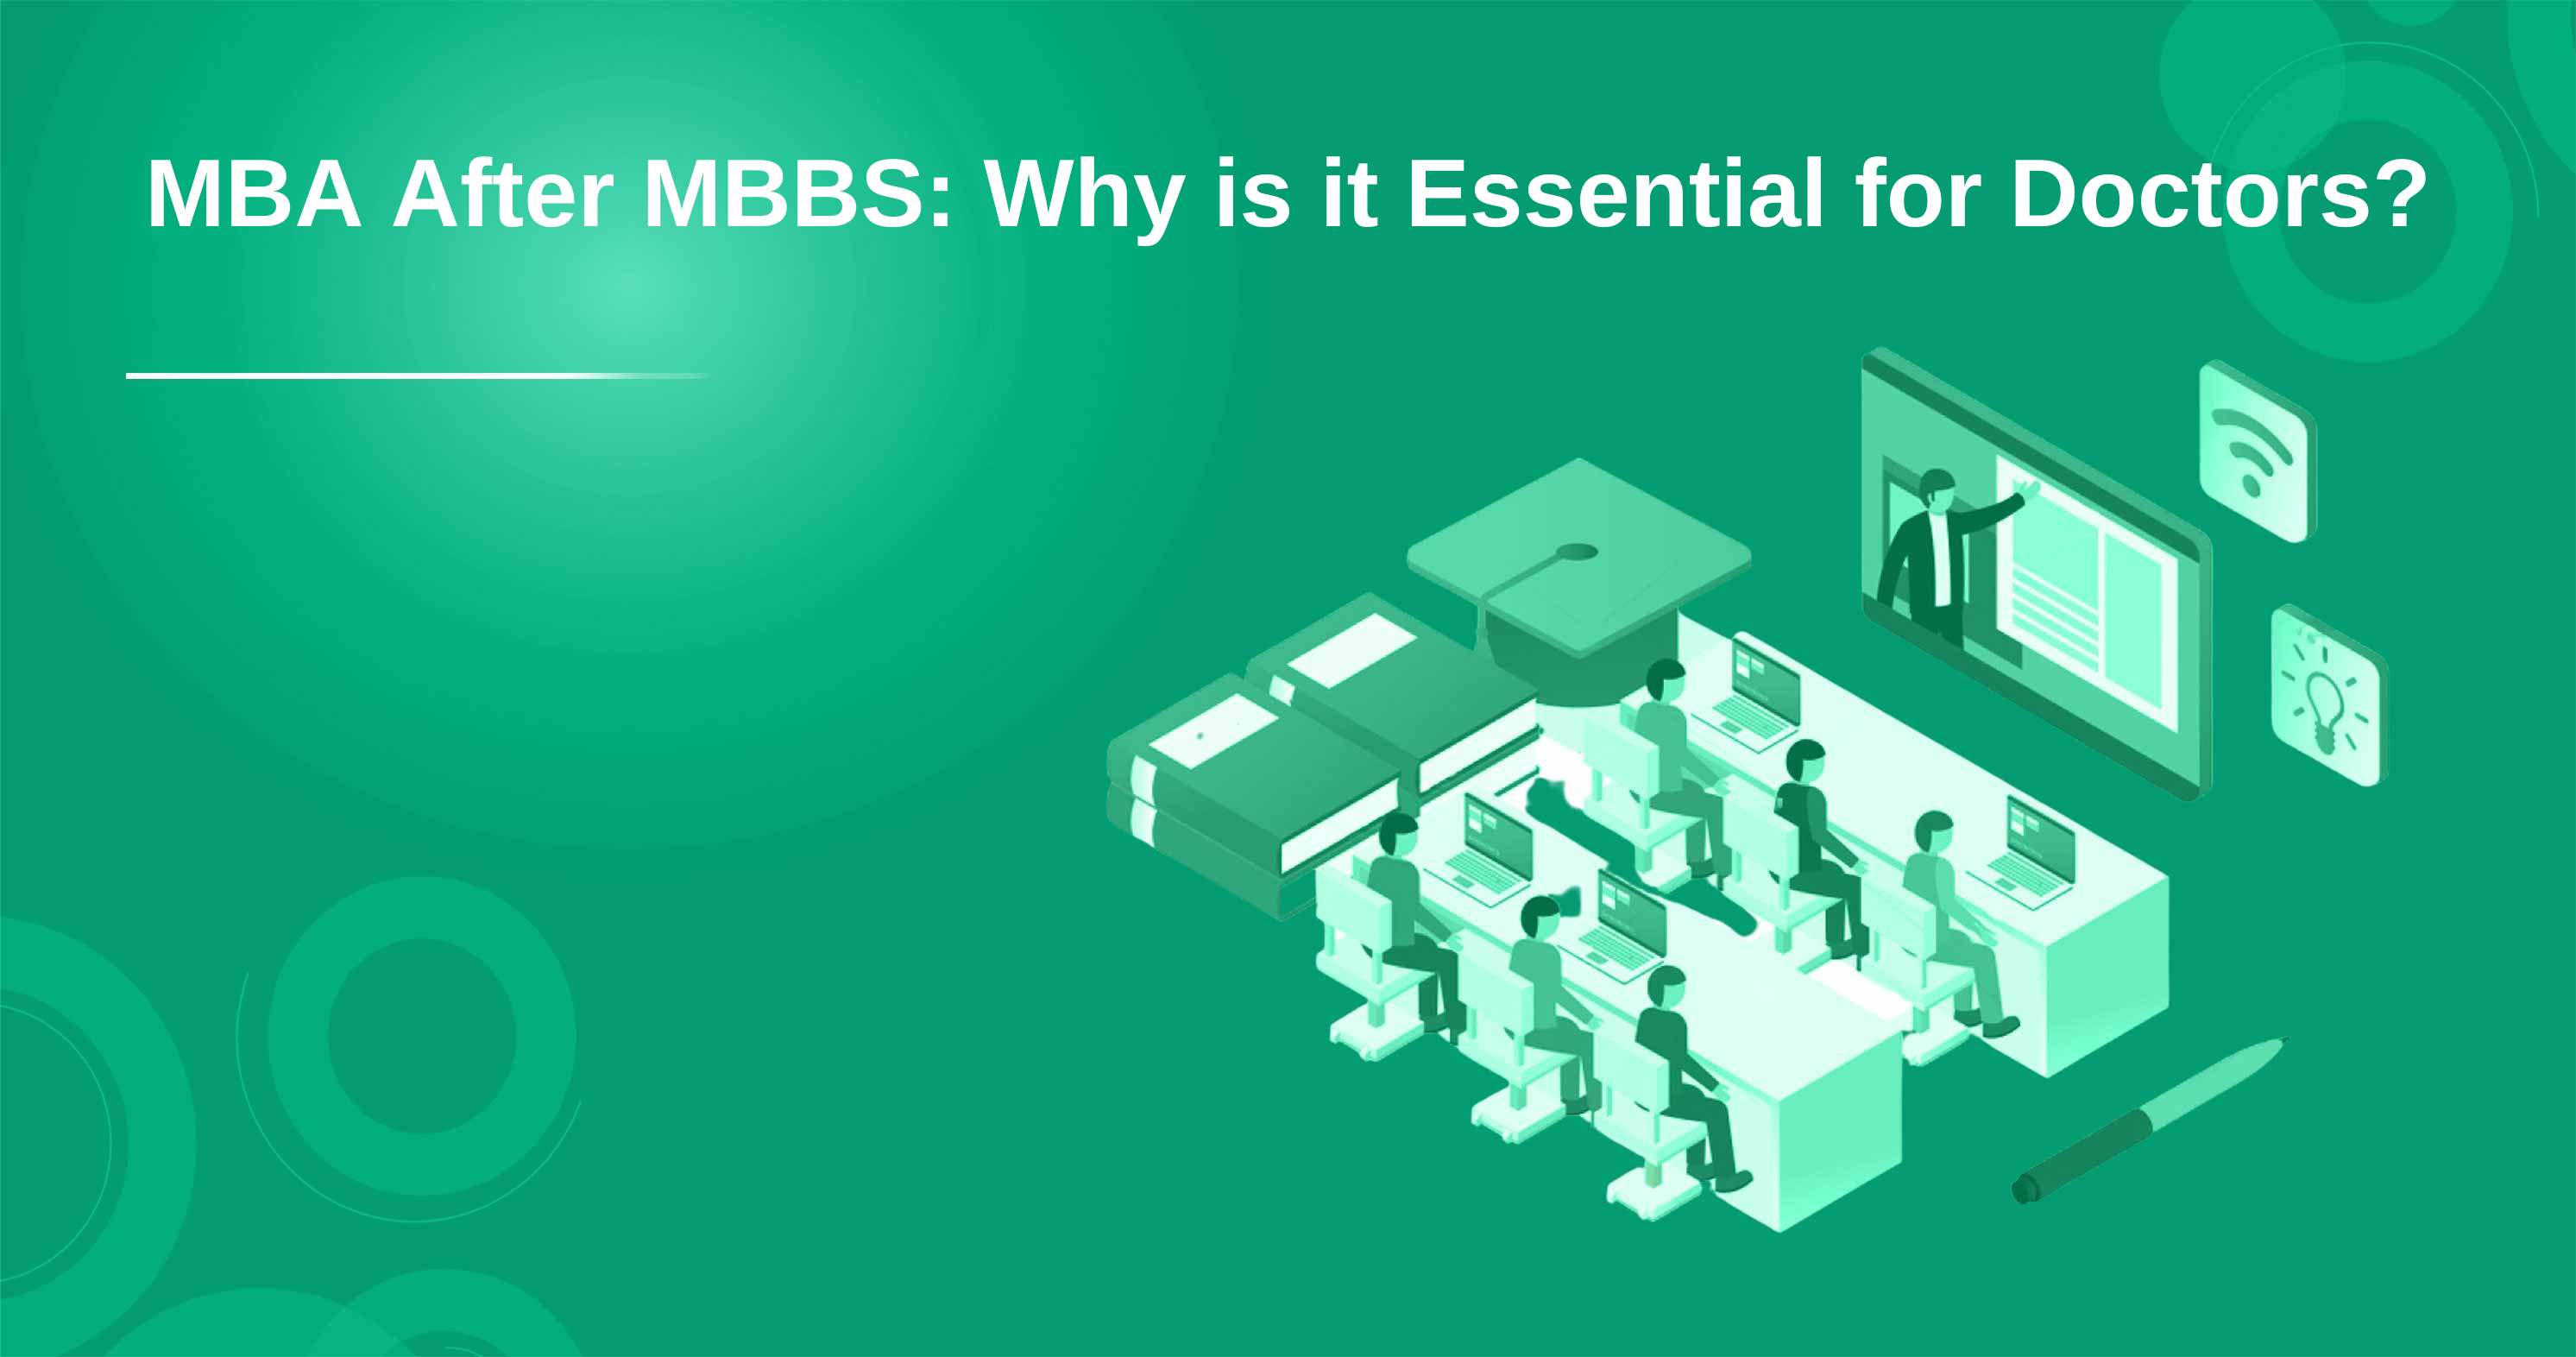 MBA After MBBS: Why is it Essential for Doctors?